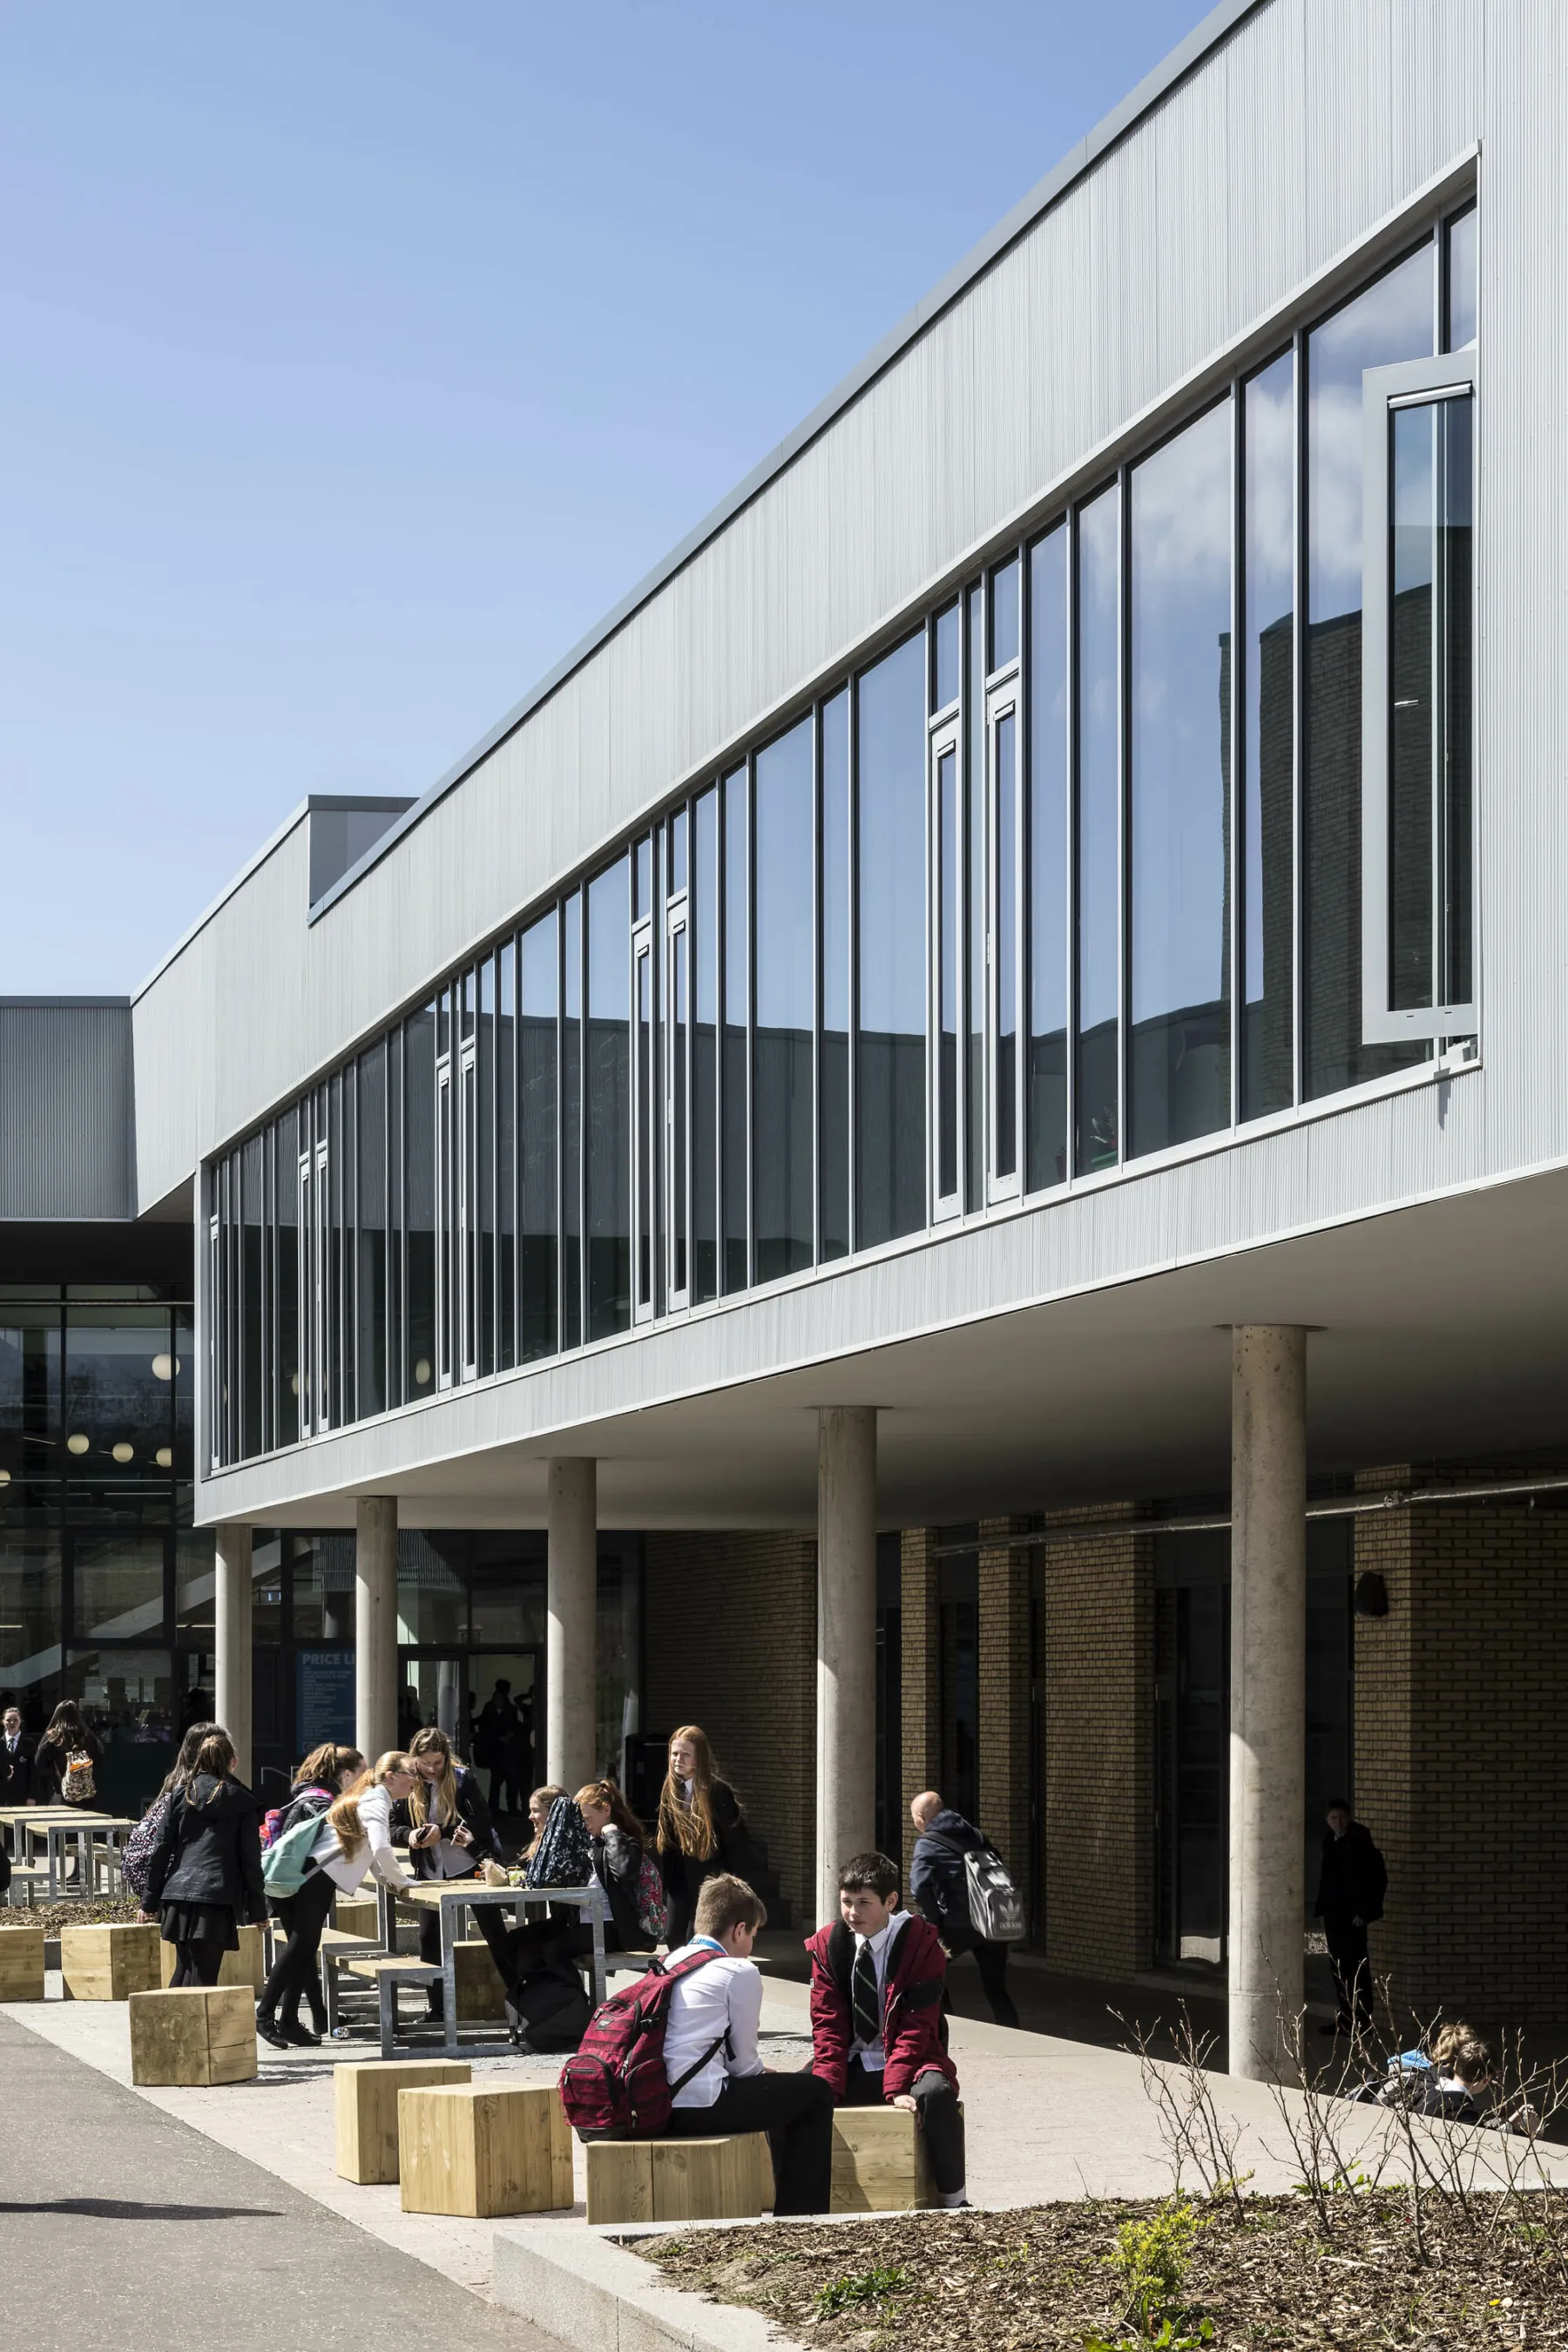 The exterior of the new build Garnock School showing pupils having lunch at benches and tables in the sunshine